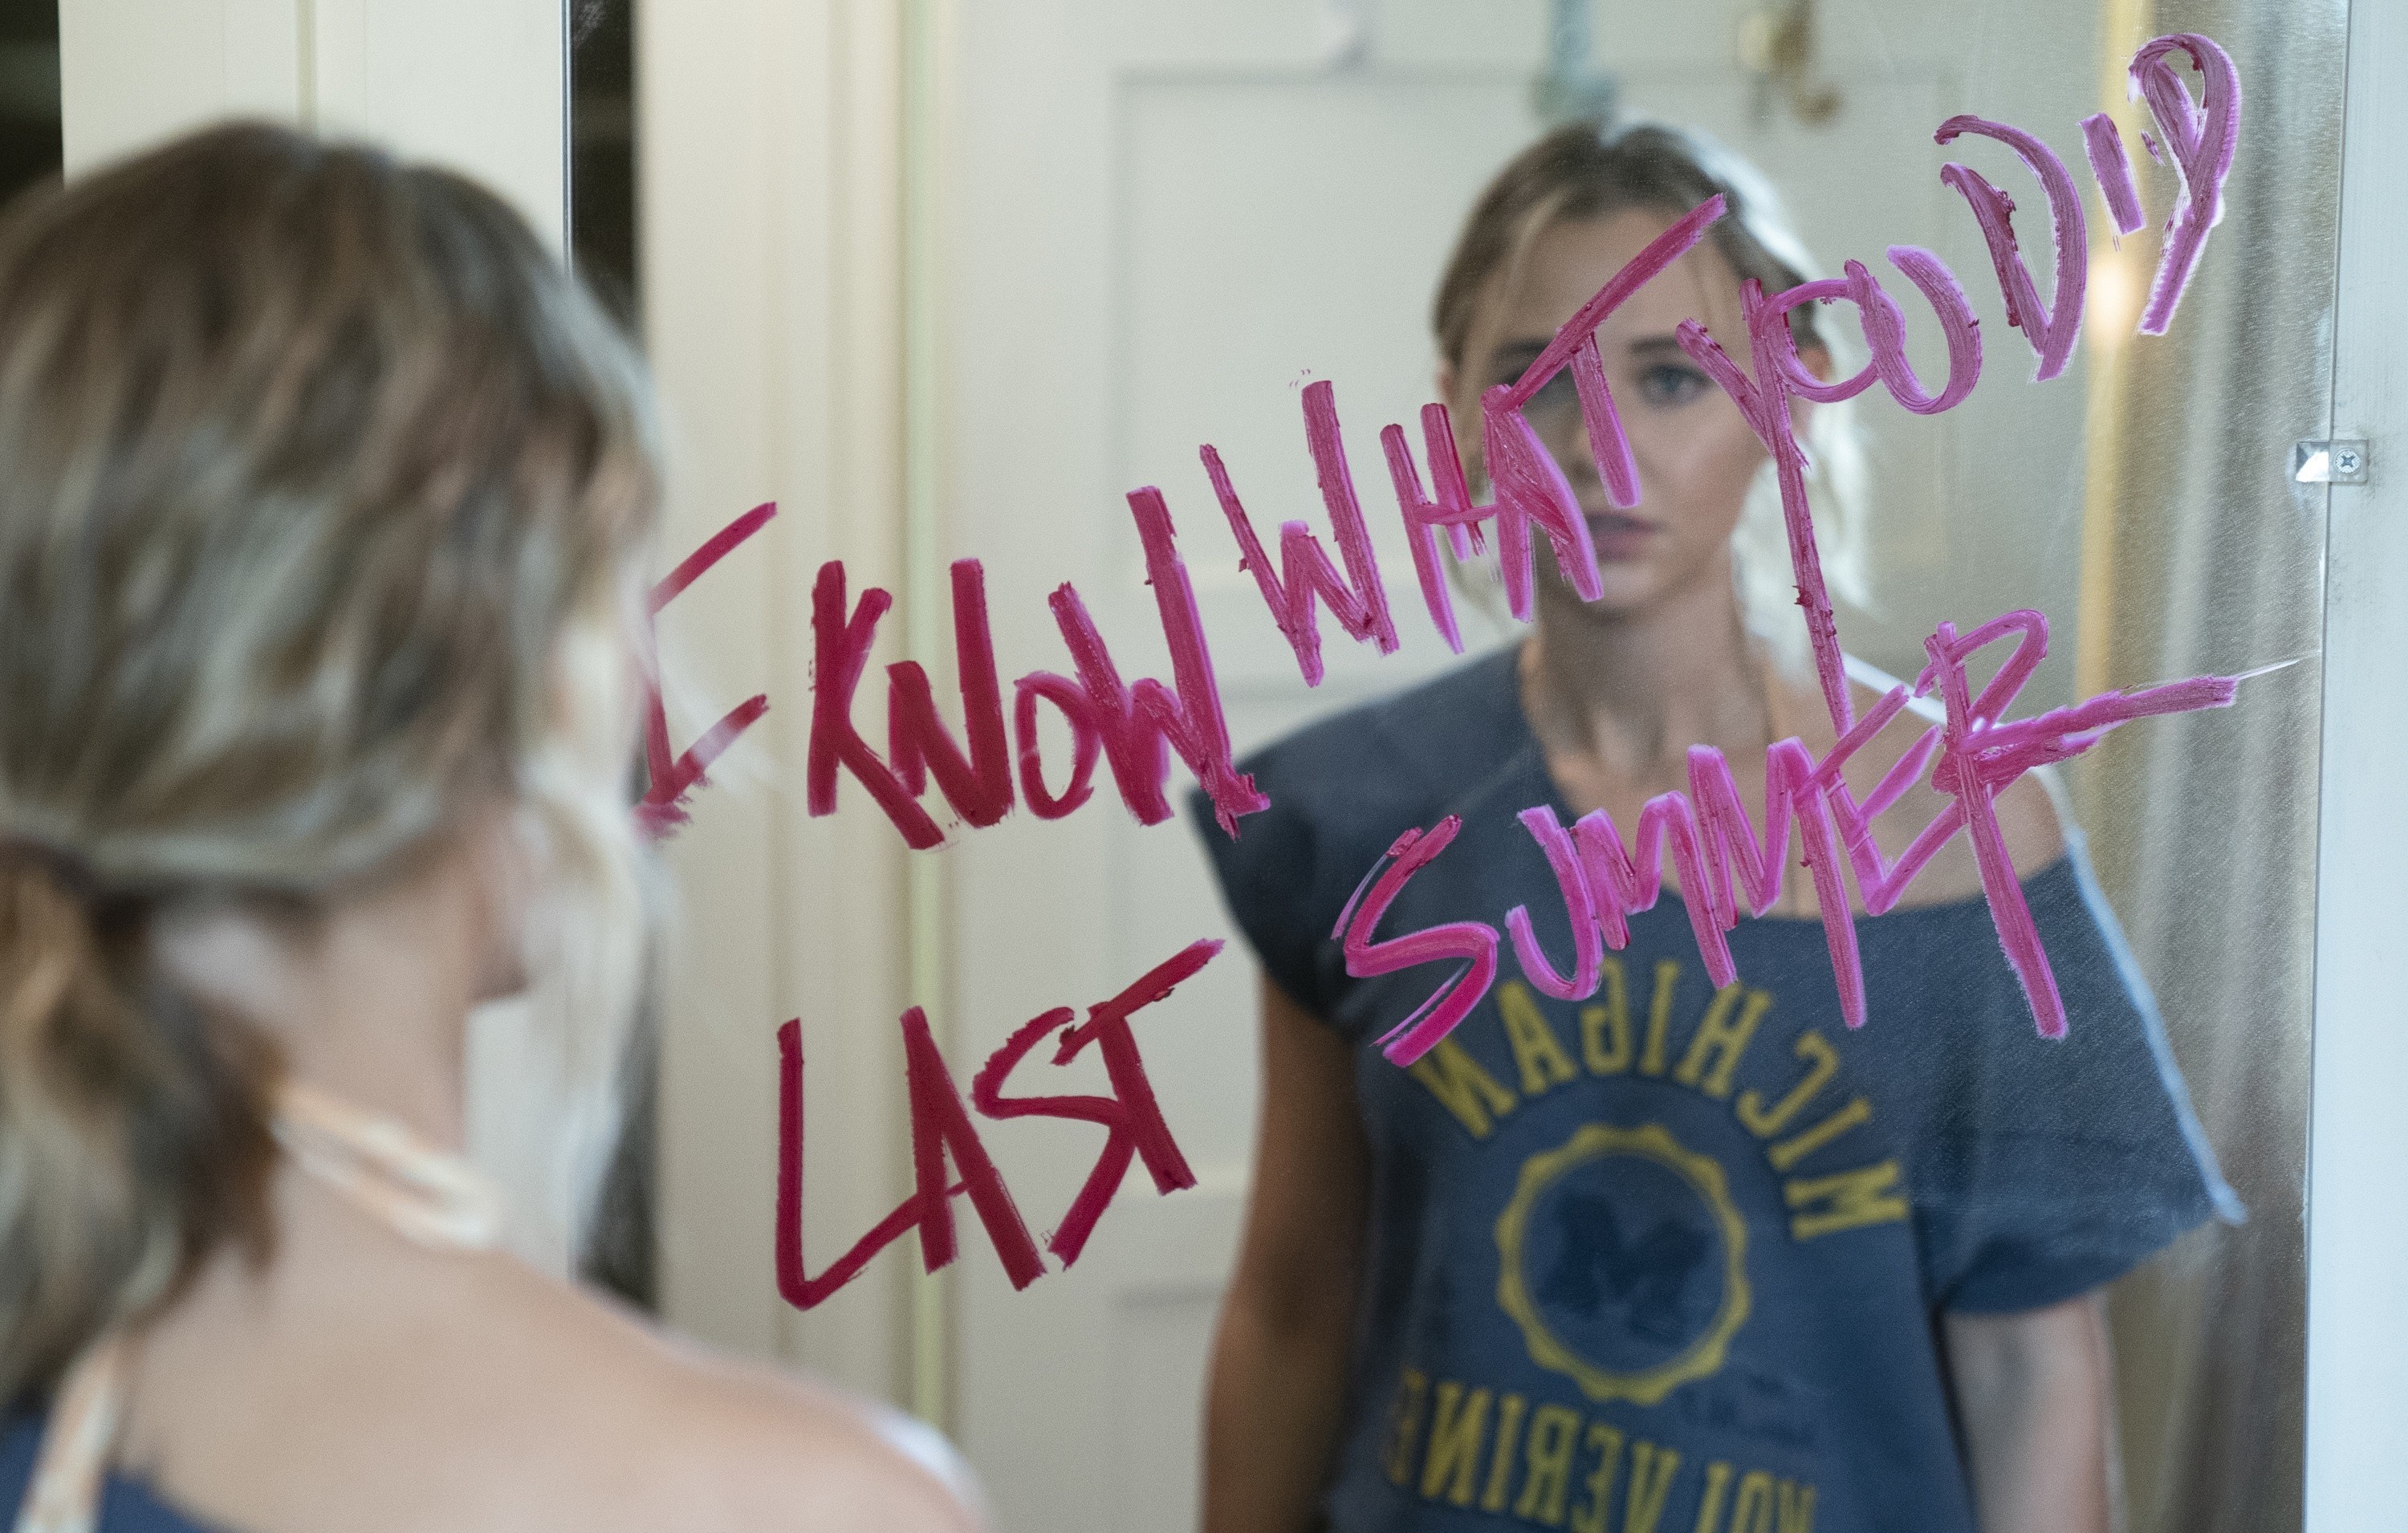 Madison Iseman looking in mirror seeing &quot;I know what you did last summer&quot; written across